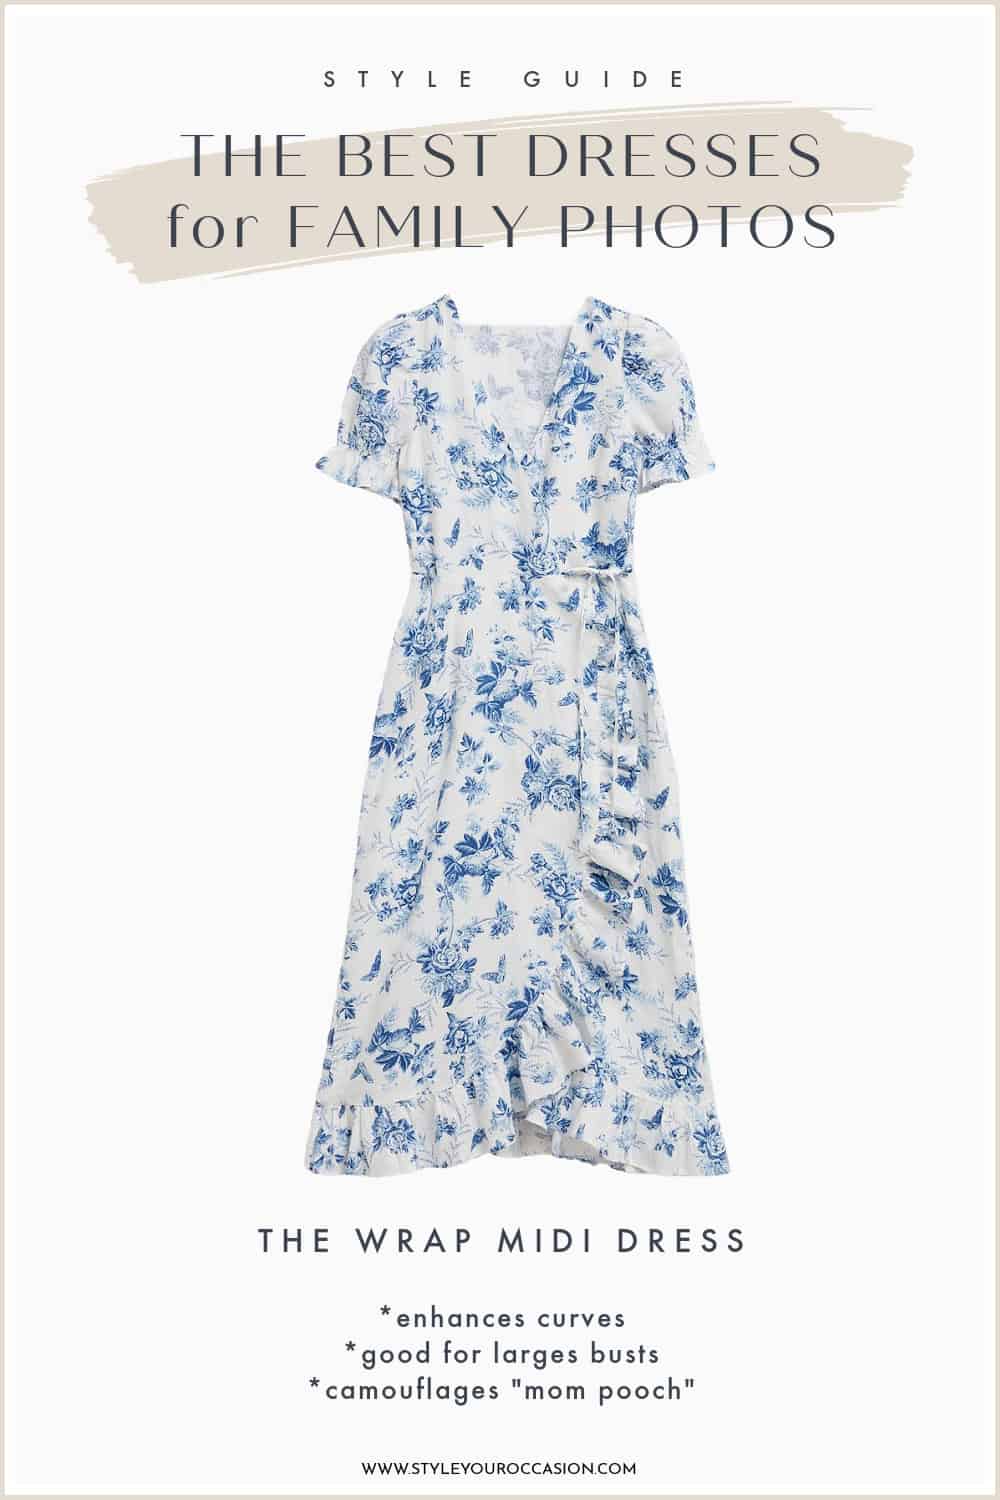 an image board of one of the best dresses to wear for family photos featuring a white wrap midi dress with a blue floral print